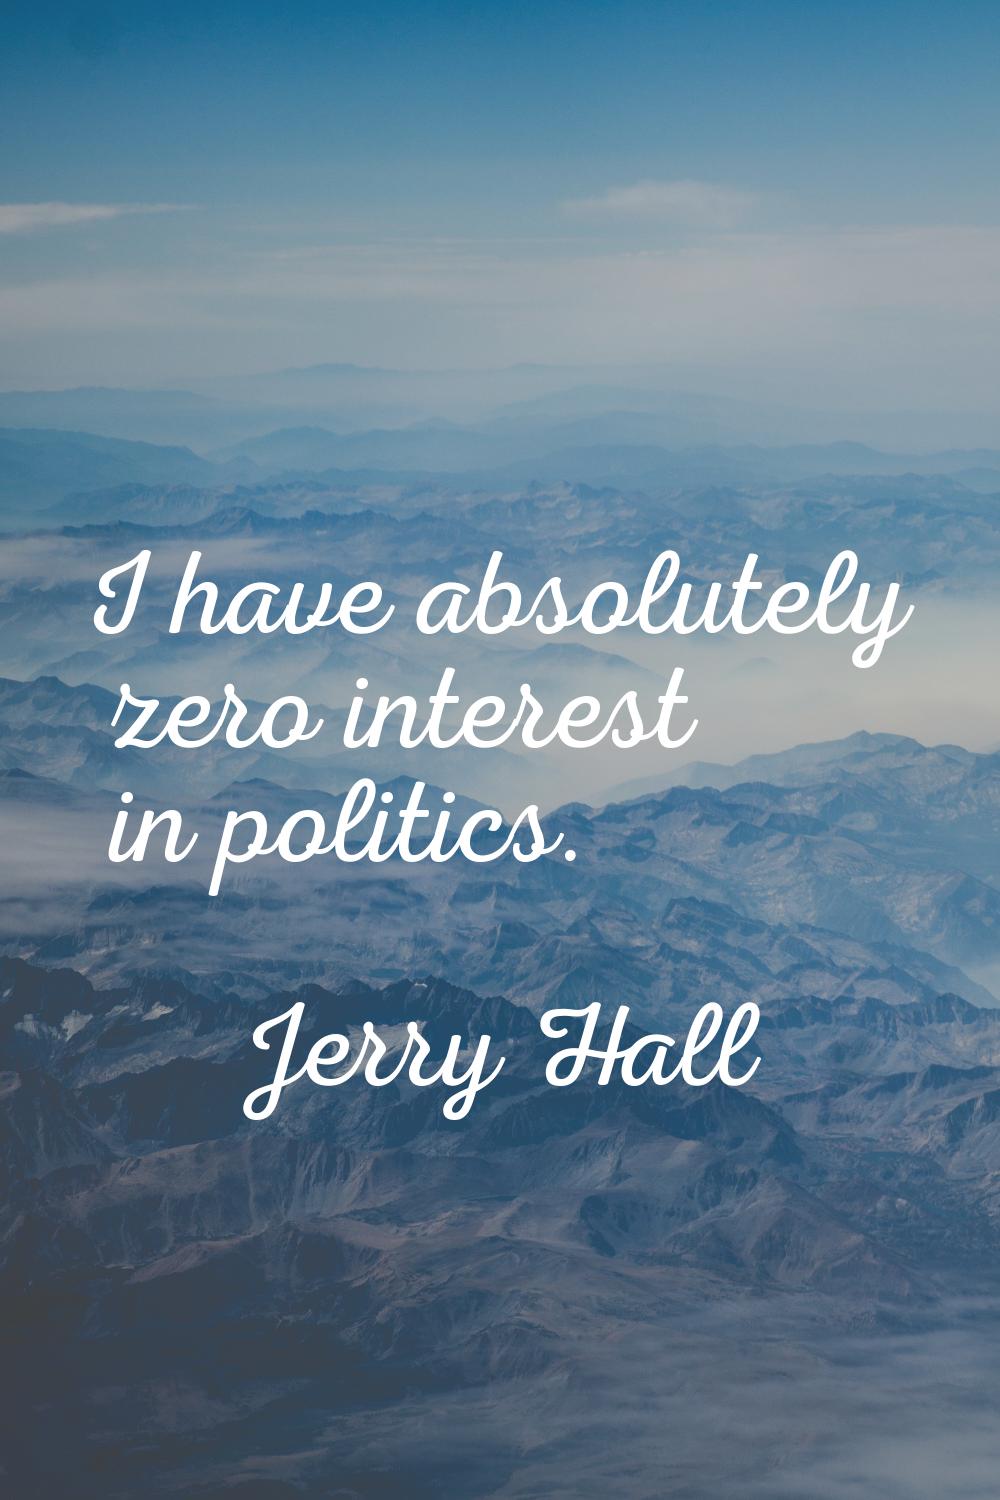 I have absolutely zero interest in politics.